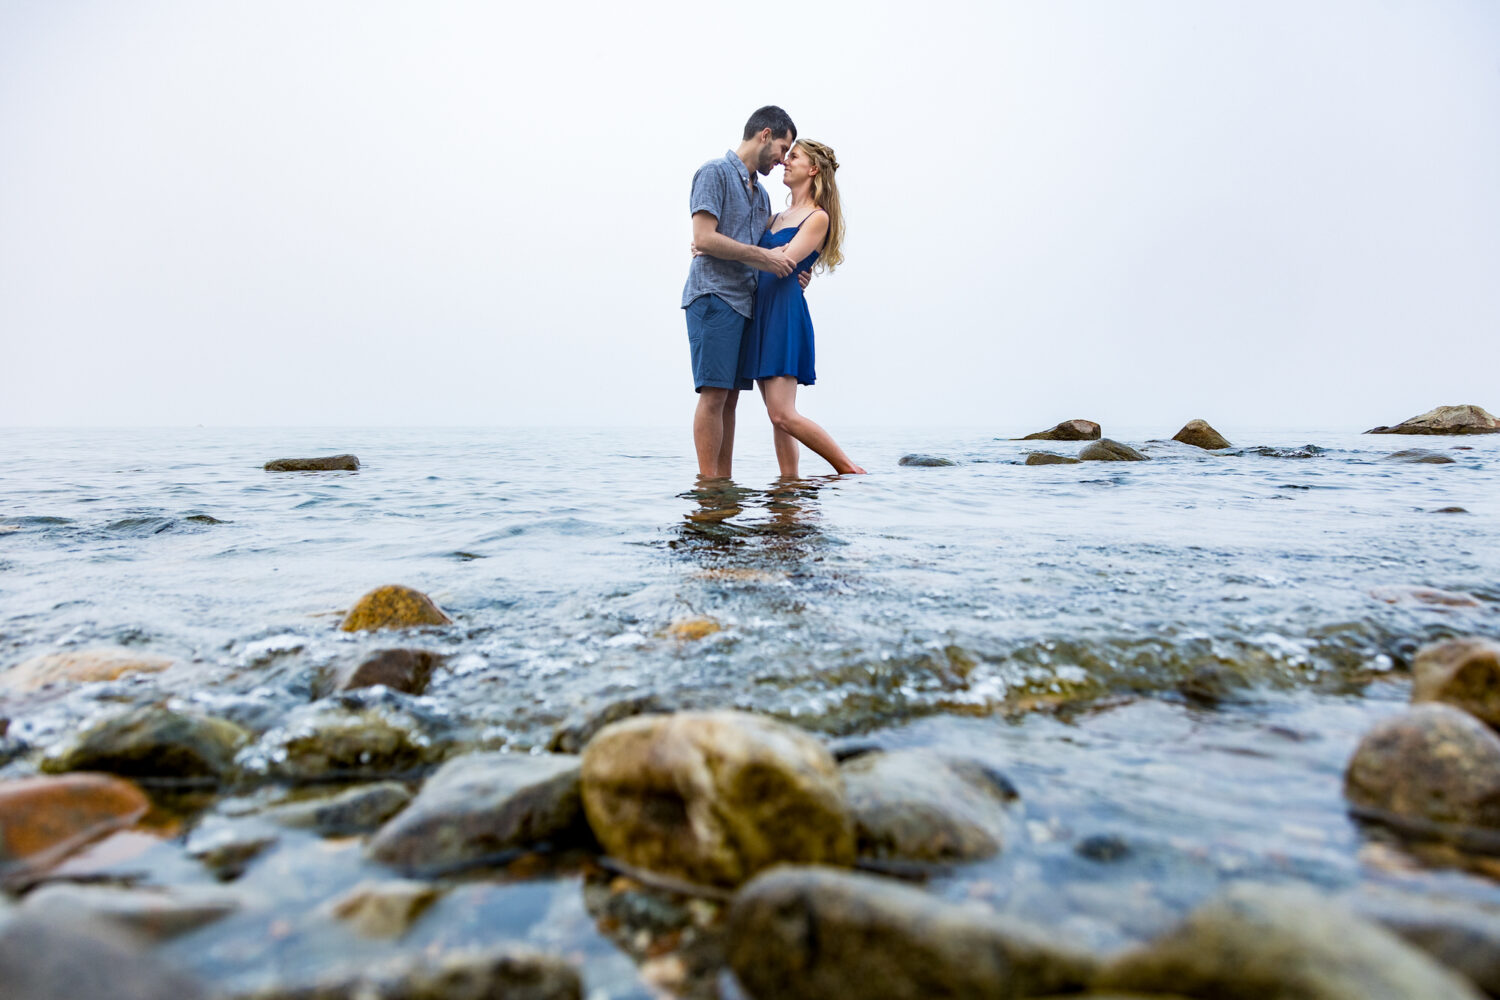 A barefoot engagement photo session at a beach in Lake Tahoe.